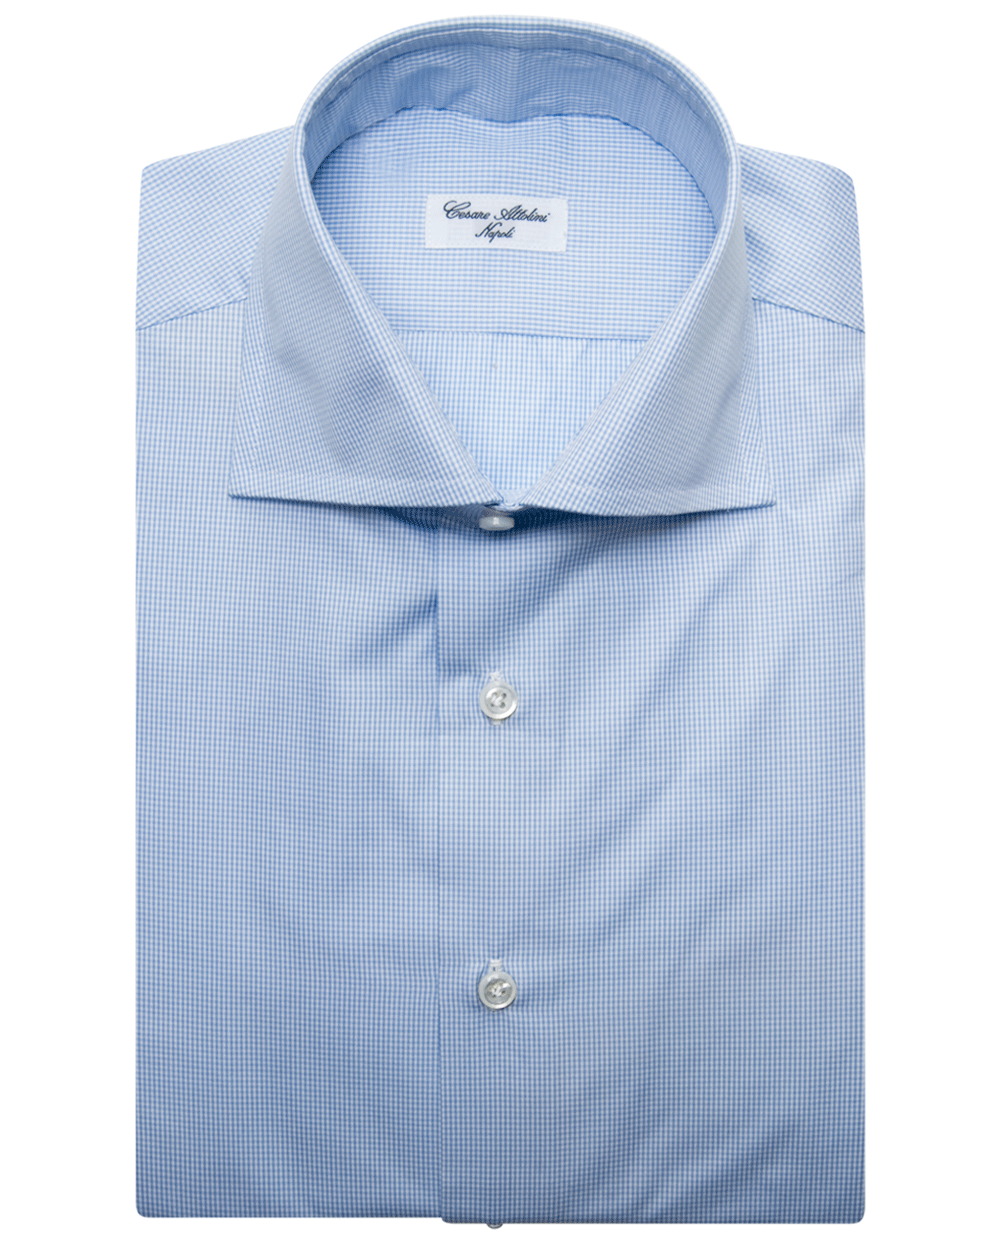 Blue and White Micro Checked Dress Shirt